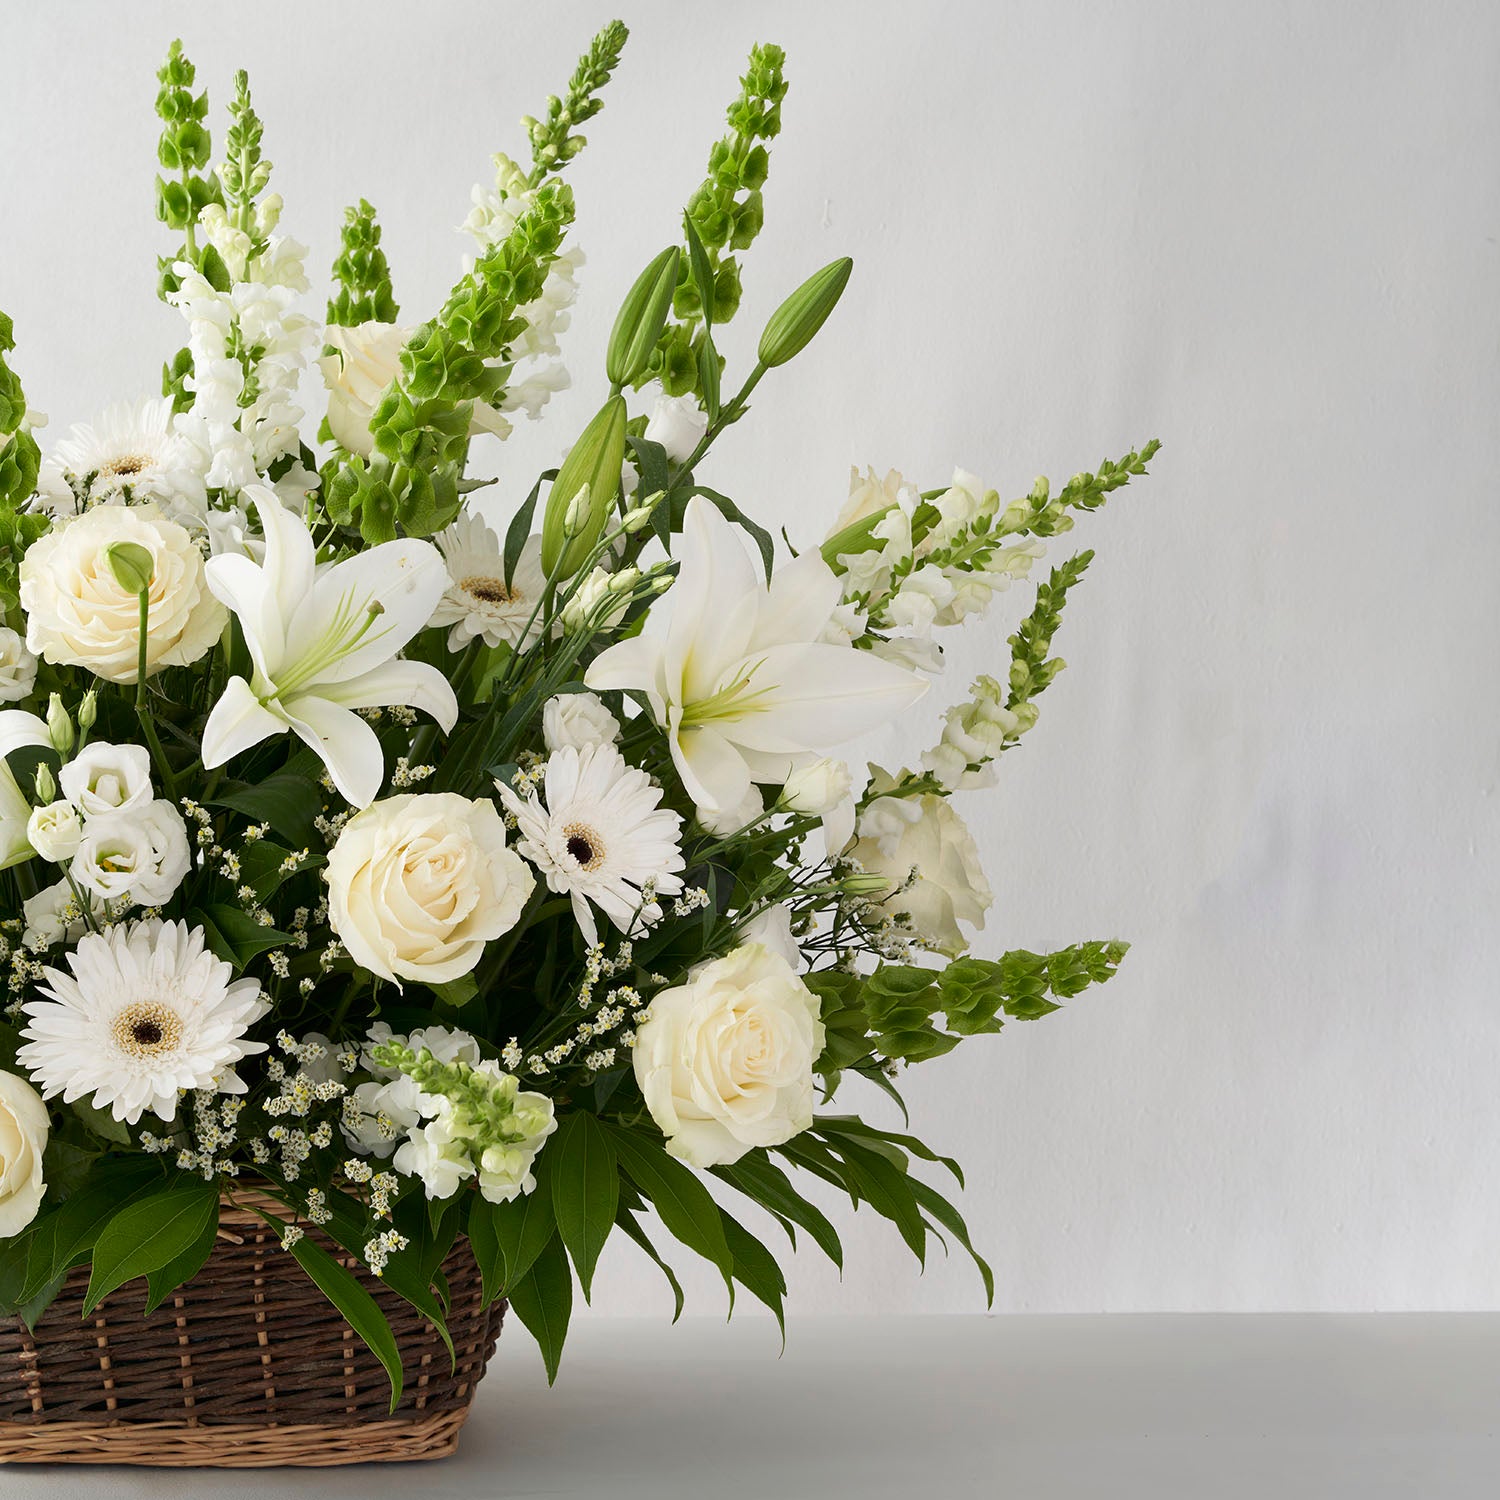 Natural basket filled with white flowers arranged in a spray.